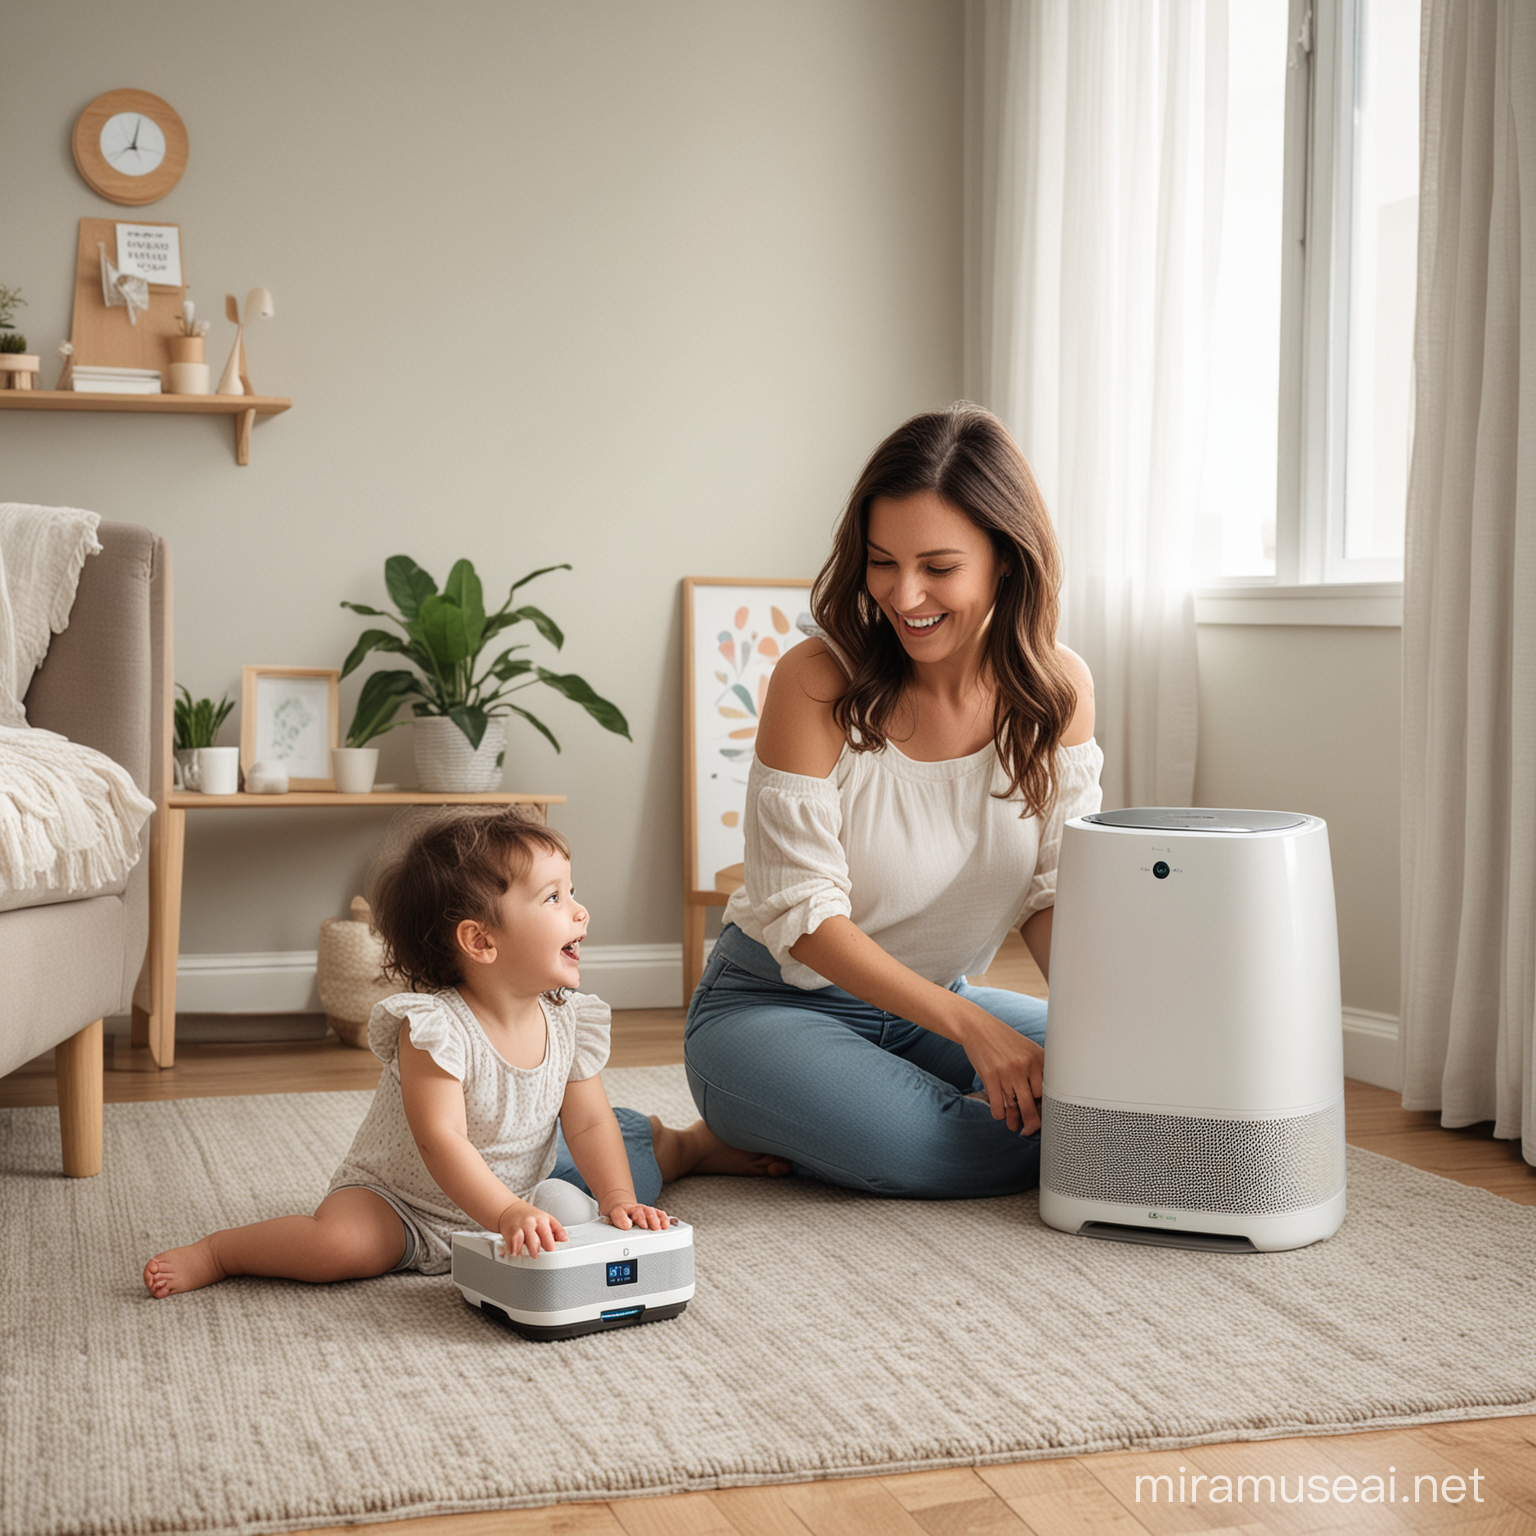 Joyful Mother and Child Playing in AirPurified Room